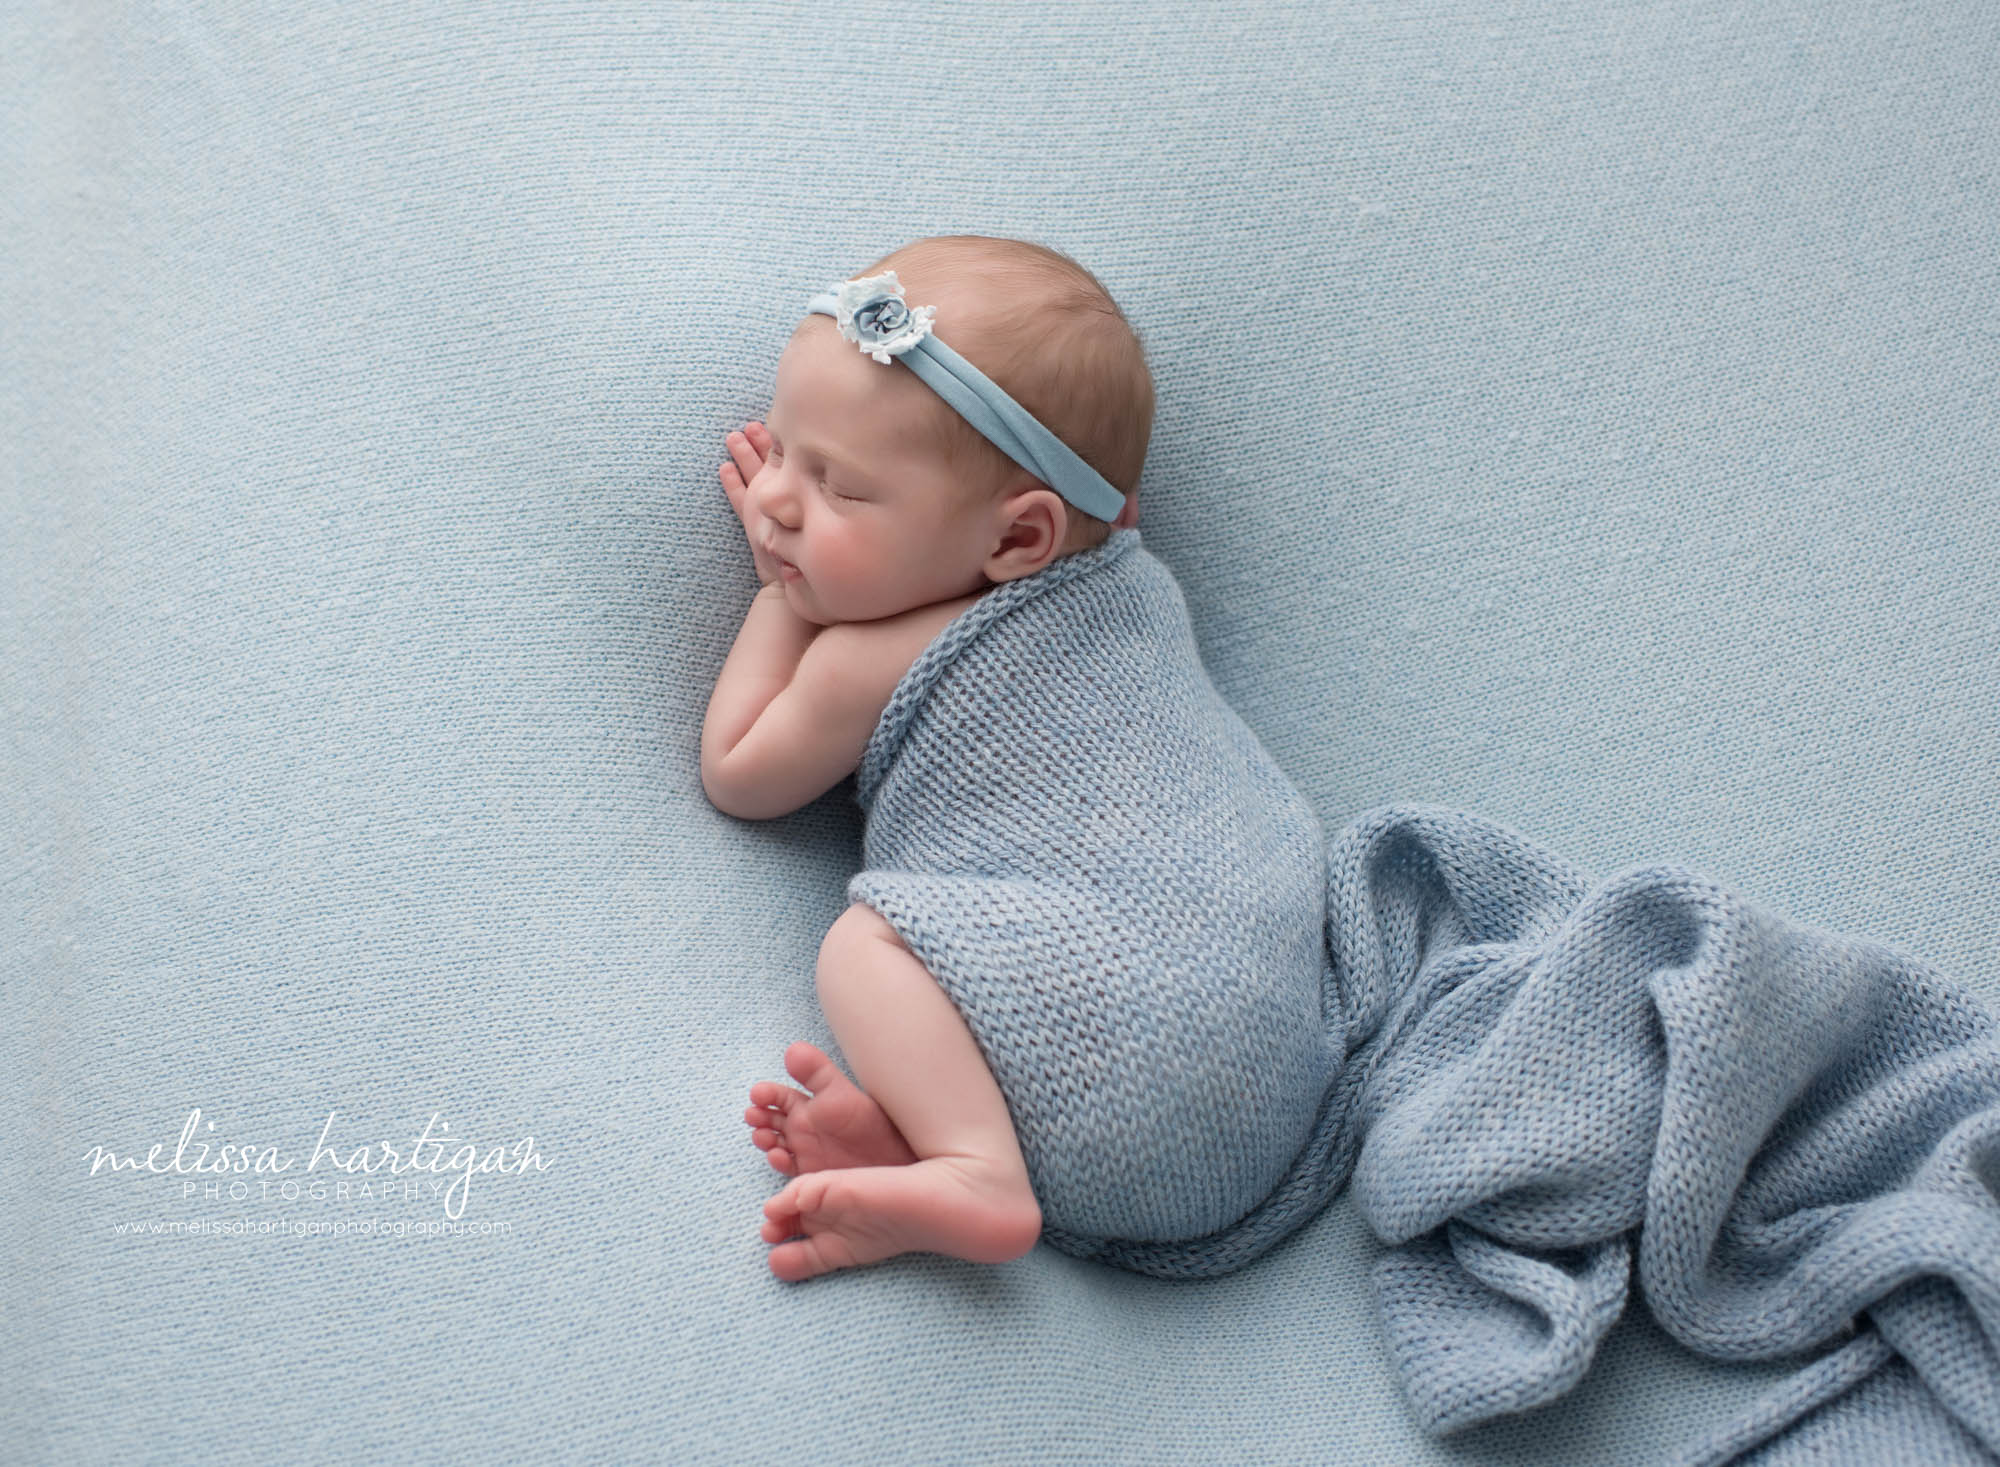 Baby girl posed on side with blue knitted wrap draped over baby